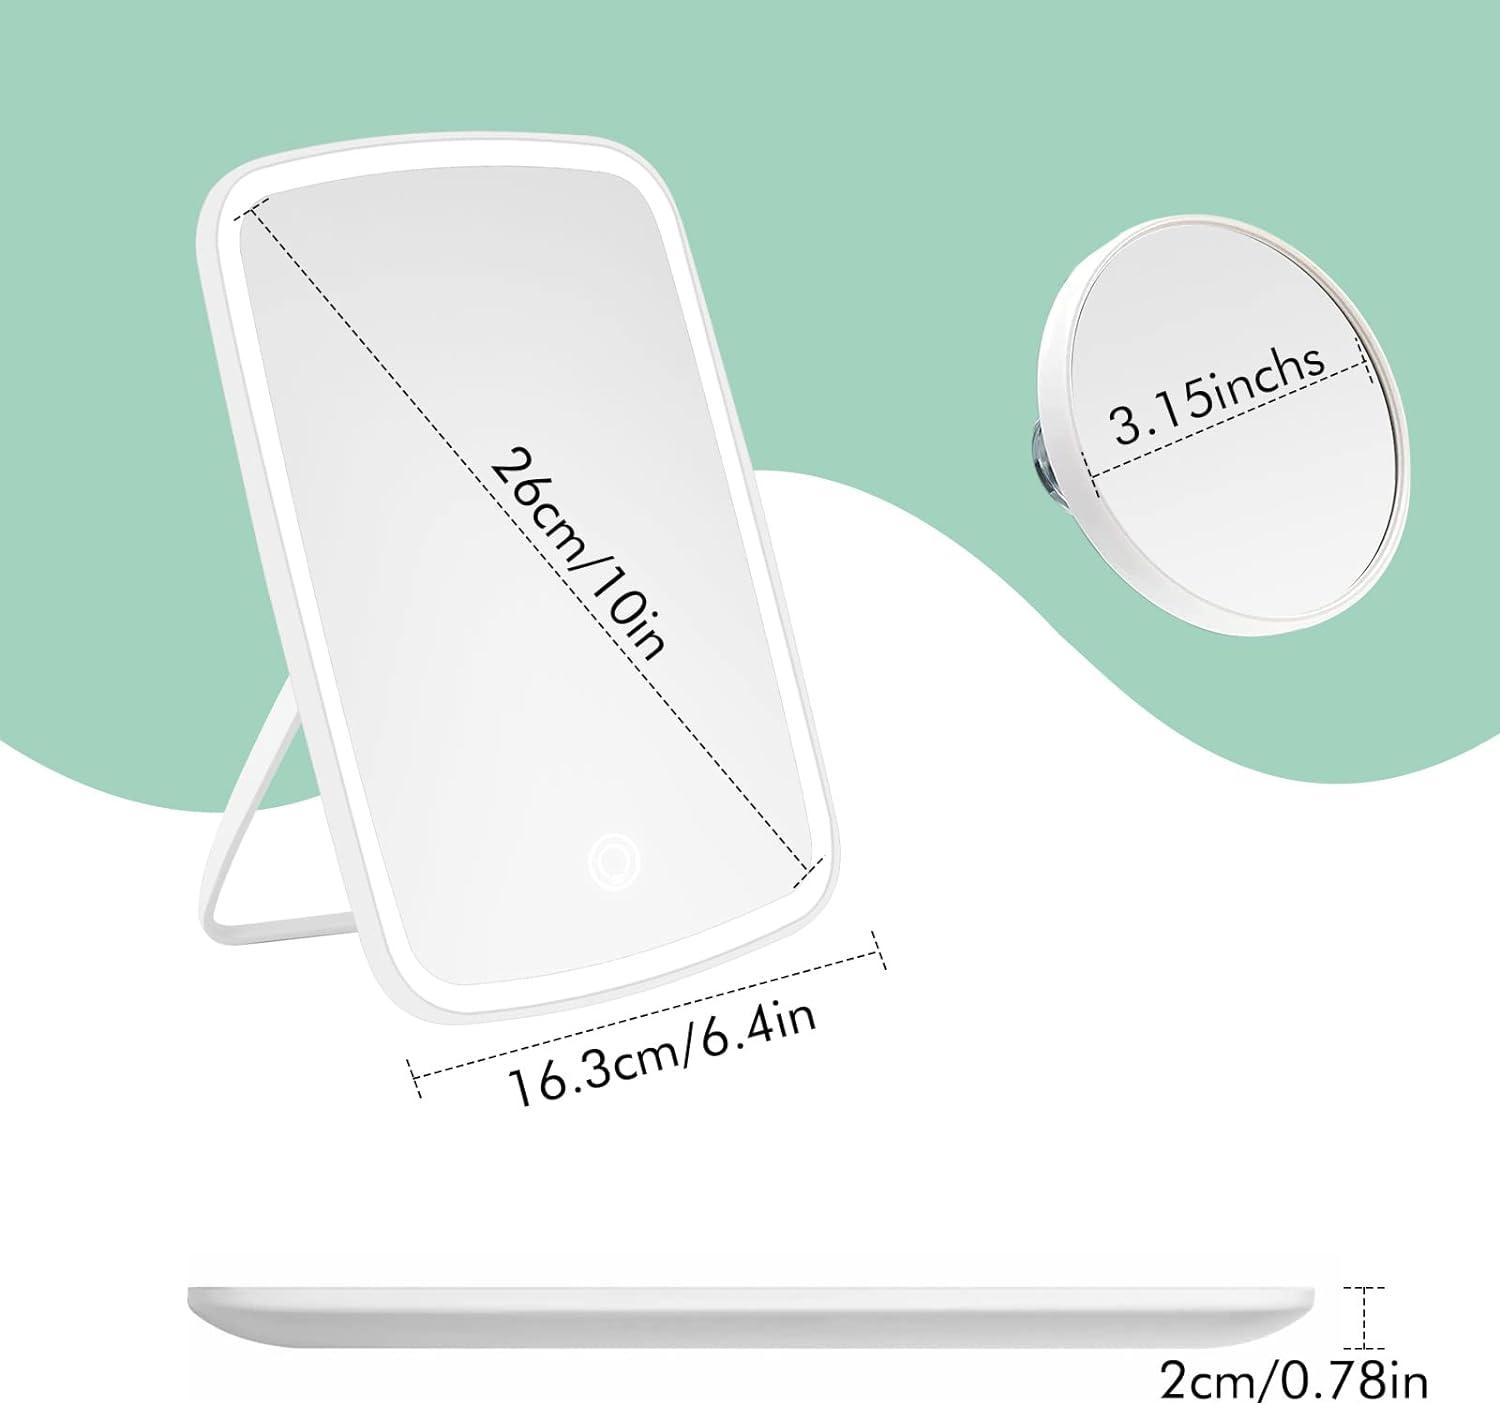 Makeup Vanity Mirror with Lights, 5x Magnifying Travel Mirror Rechargeable - Massive Discounts